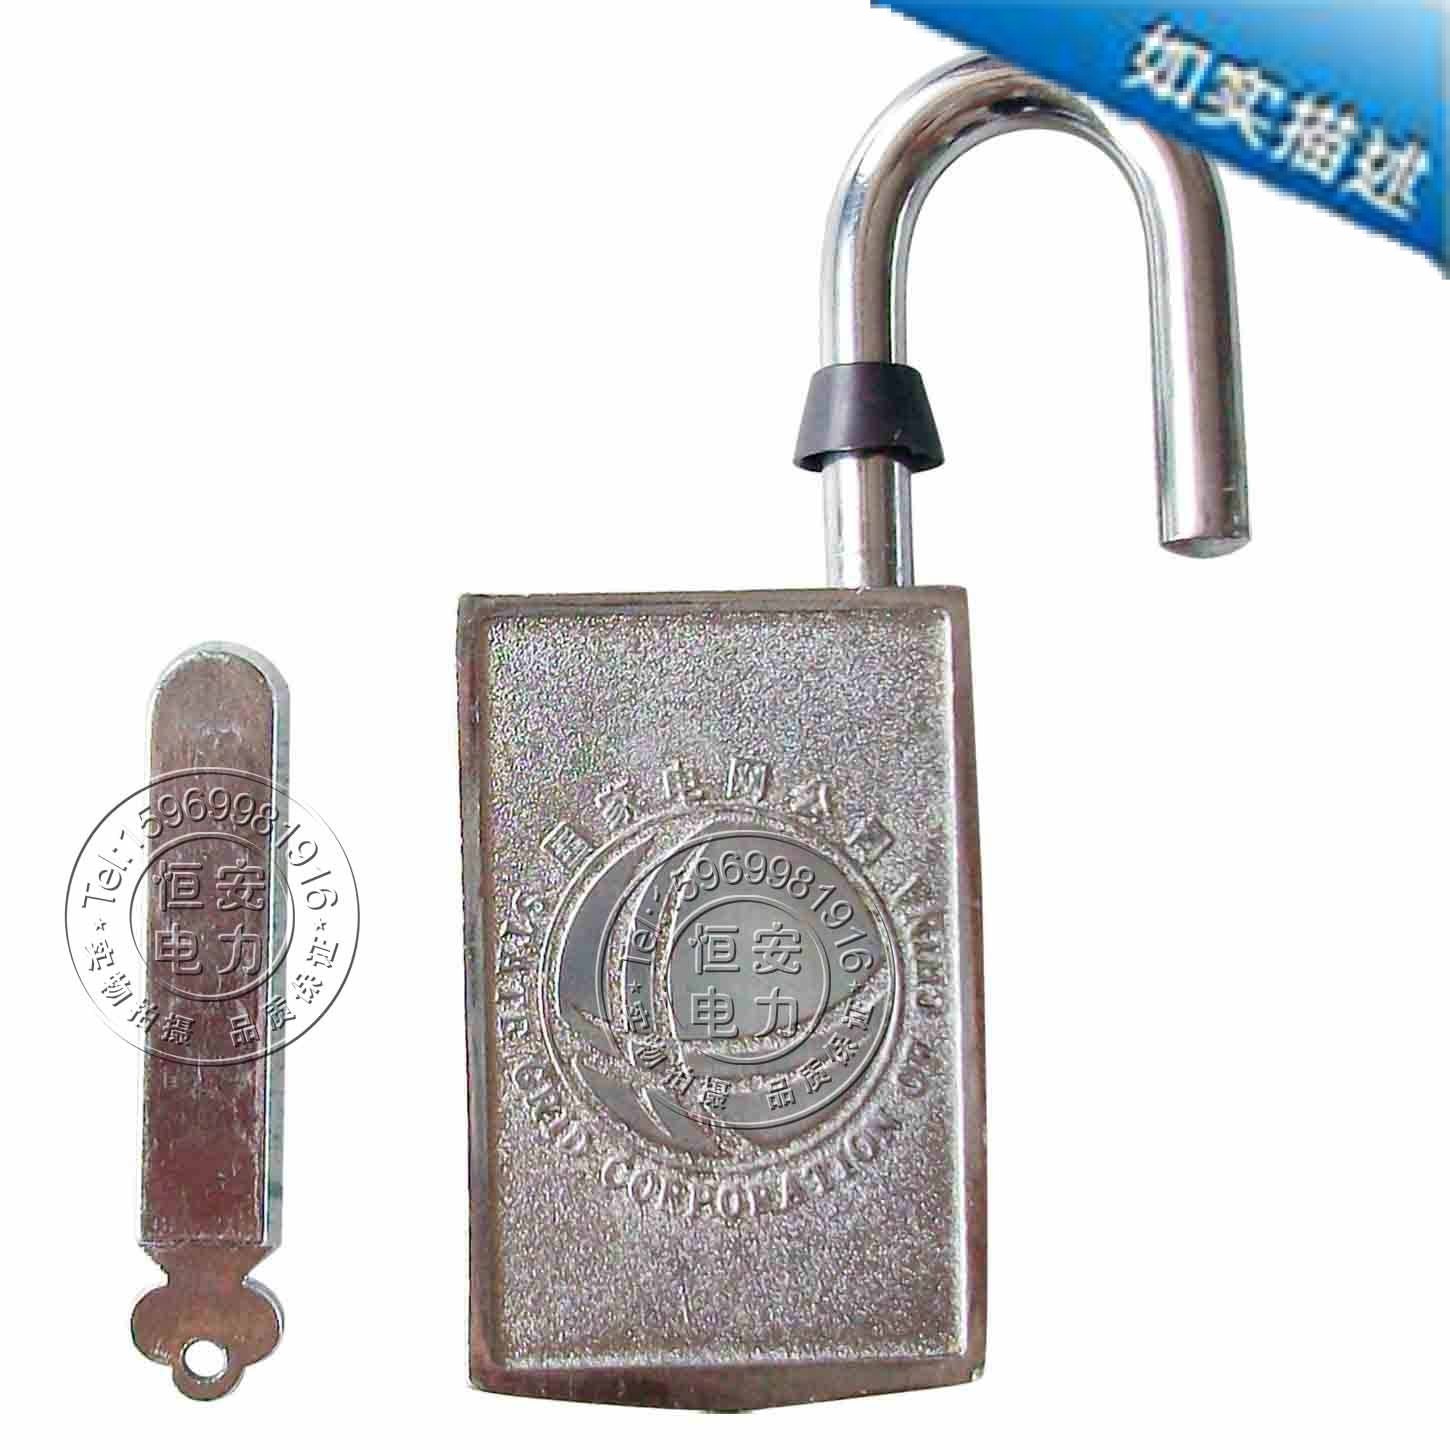 Ű  (40) ƿ ձ ڹ ٵ  귣    ʰ 2015  Ǹ Cadeado ڱ ȣ ڹ/2015 Direct Selling Cadeado Magnetic Cipher Padlock Without Key Hole 40